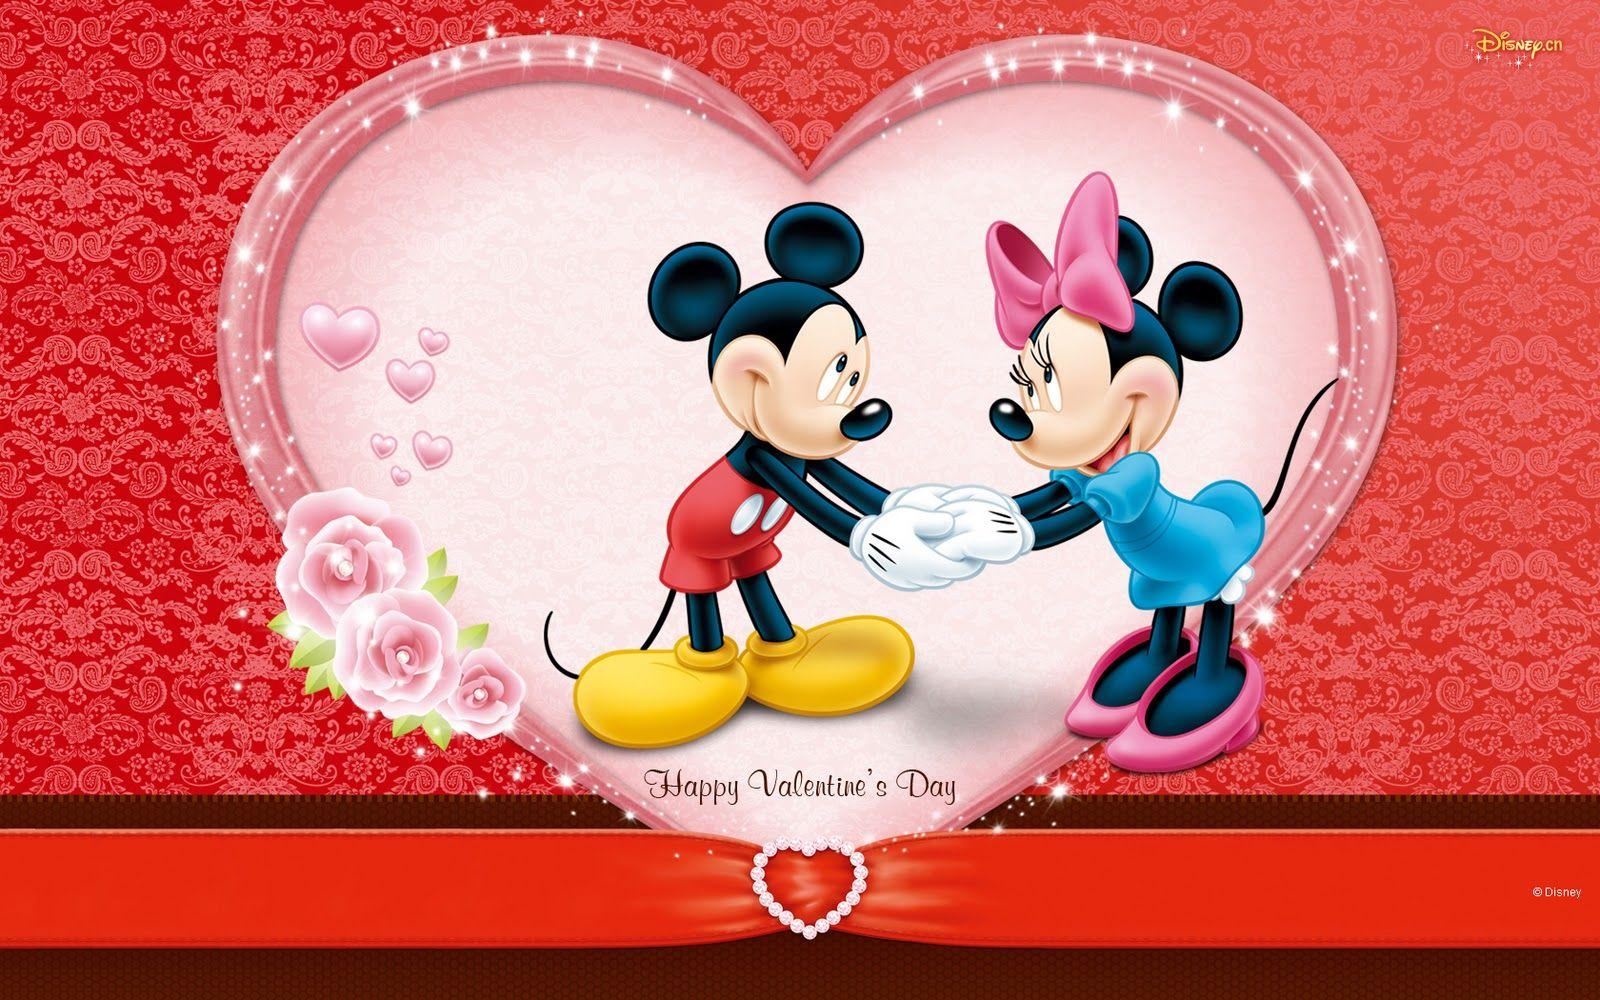 Valentine Card, E Cards 2013: Valentine's Day Desktop Wallpaper For Free. Mickey Mouse Wallpaper, Valentines Wallpaper, Disney Valentines